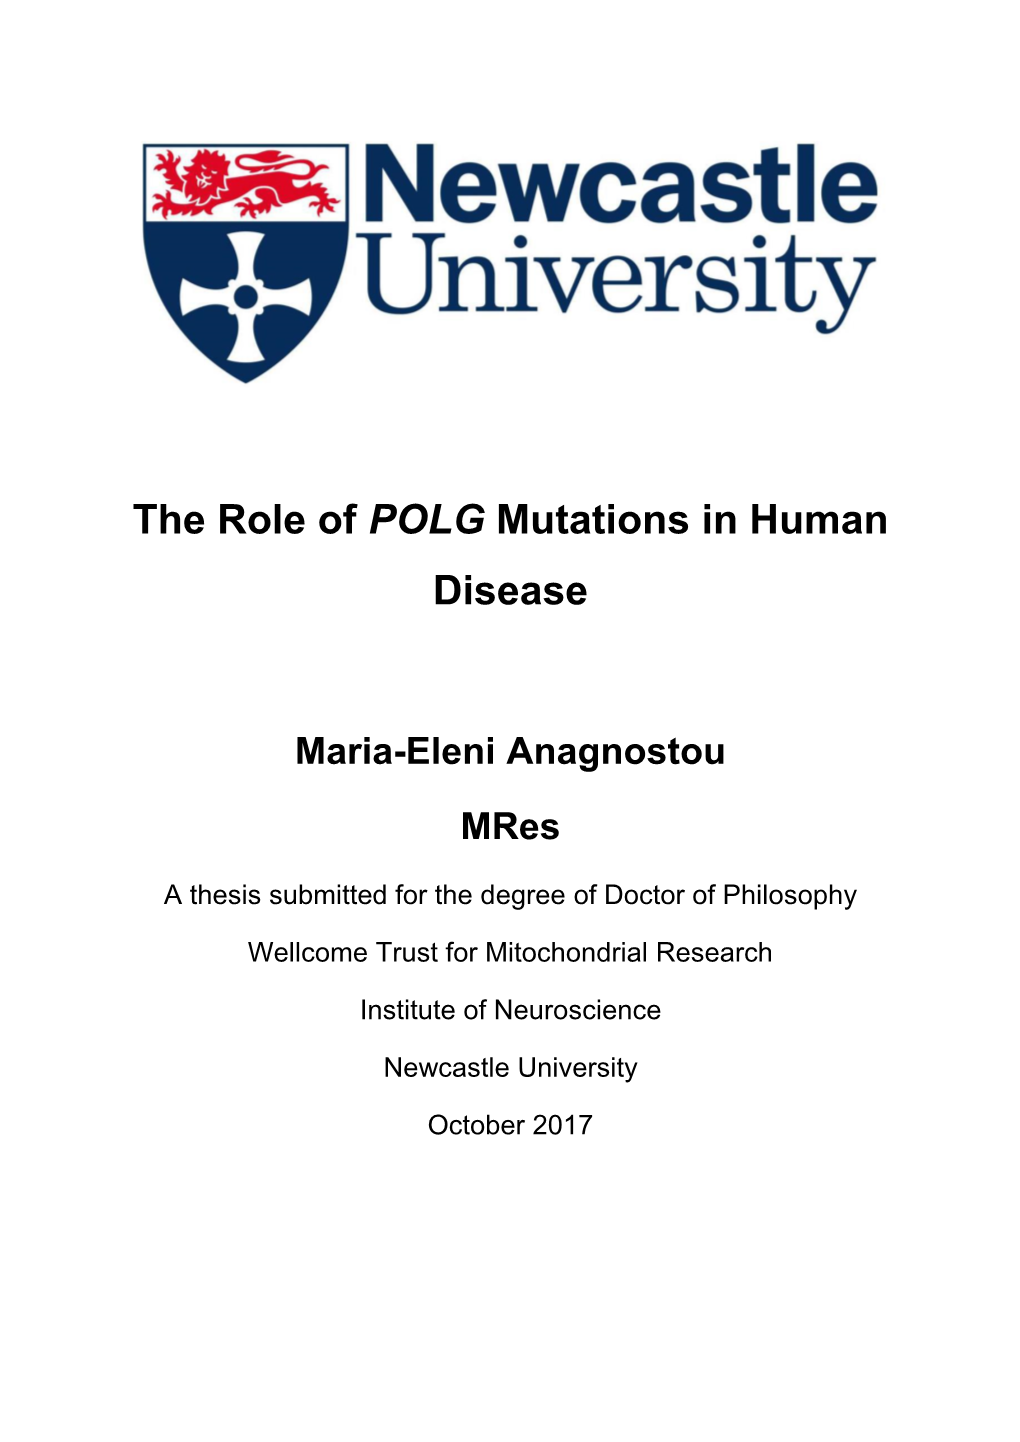 The Role of POLG Mutations in Human Disease